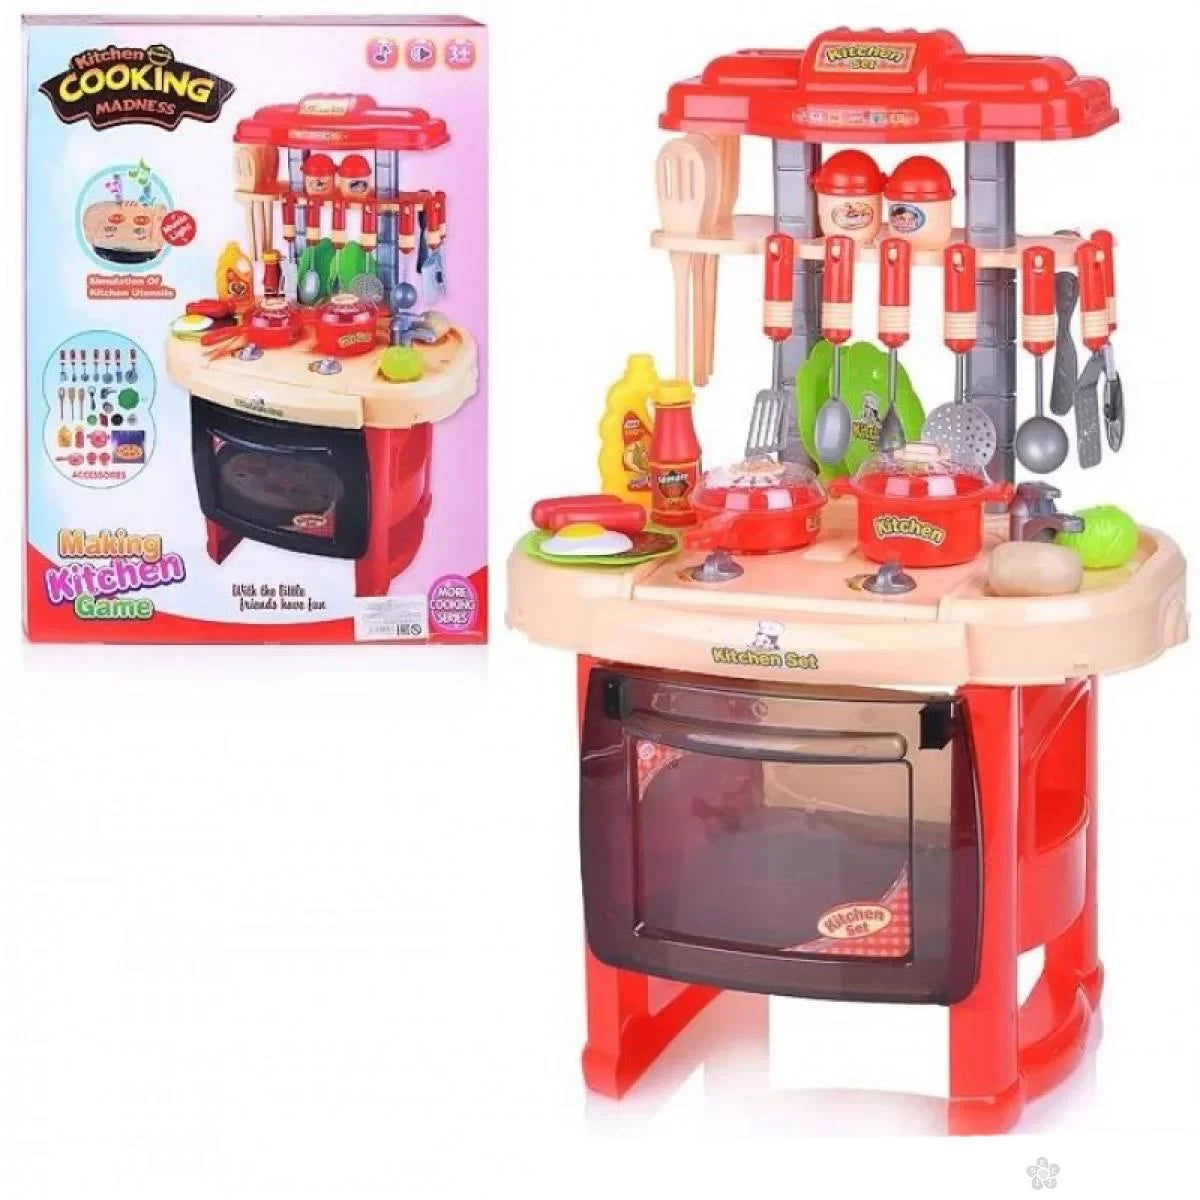 Pretend Kitchen Cooking Madness Game Set